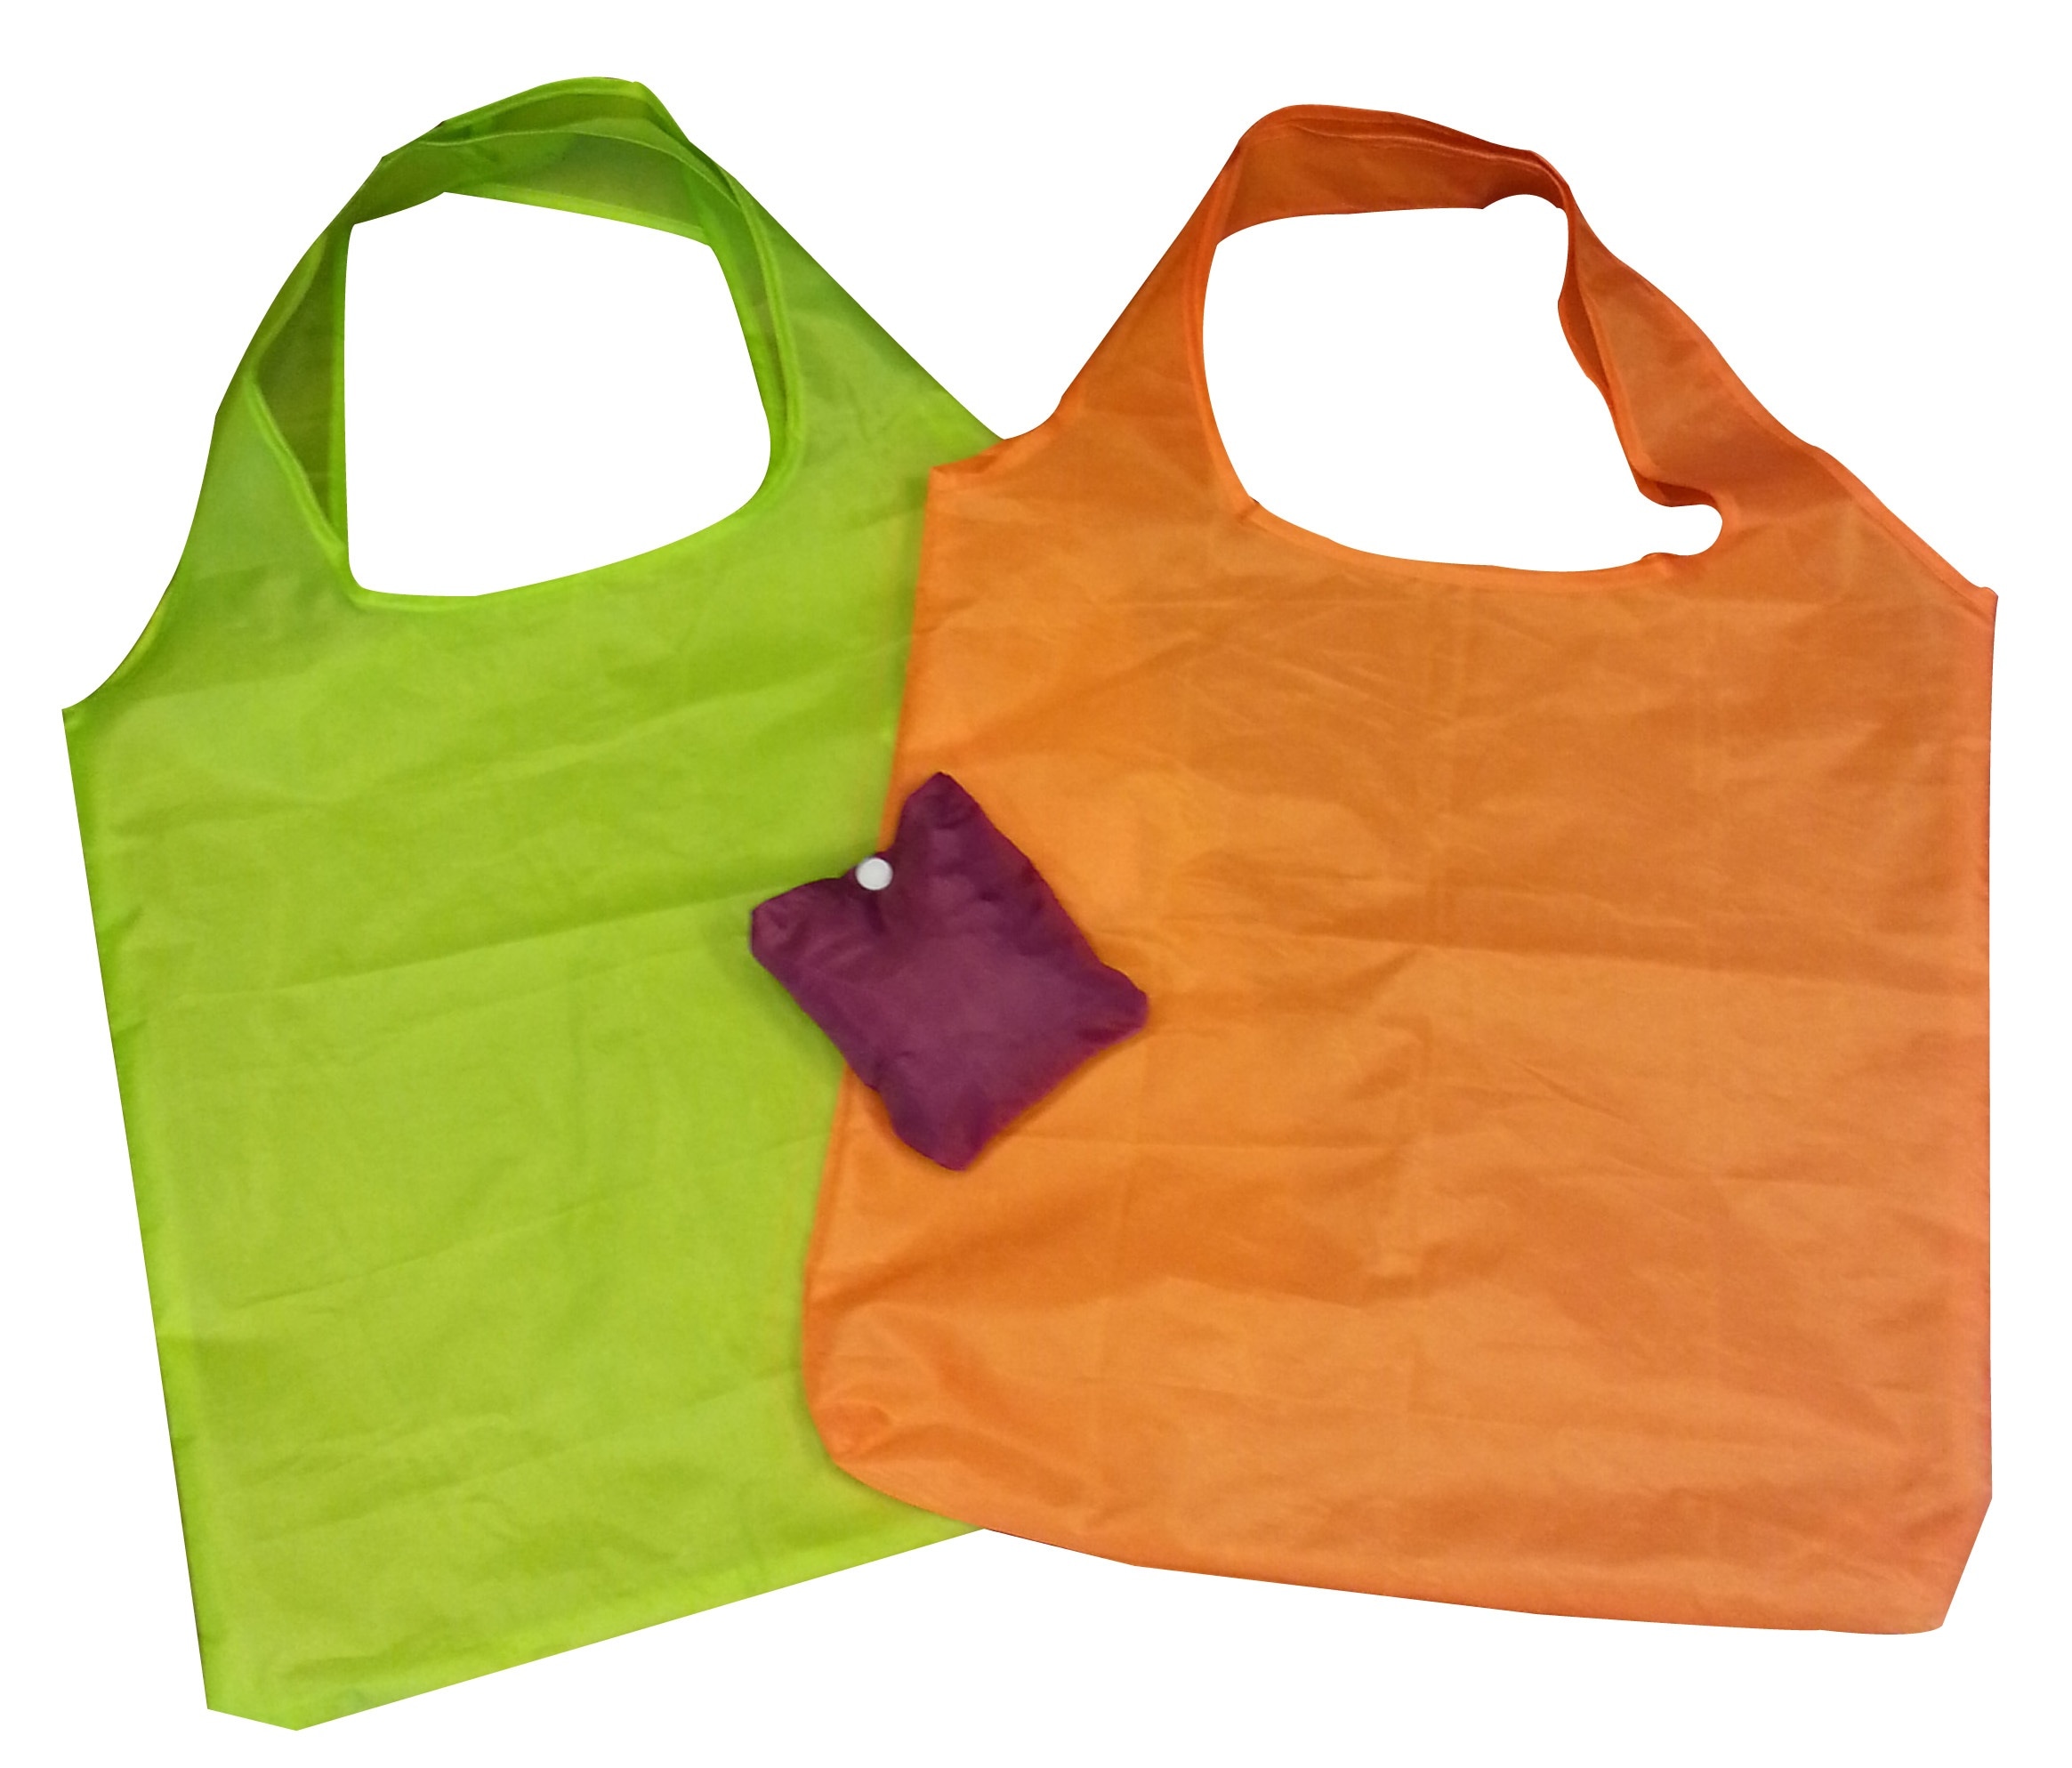 2 hand bags